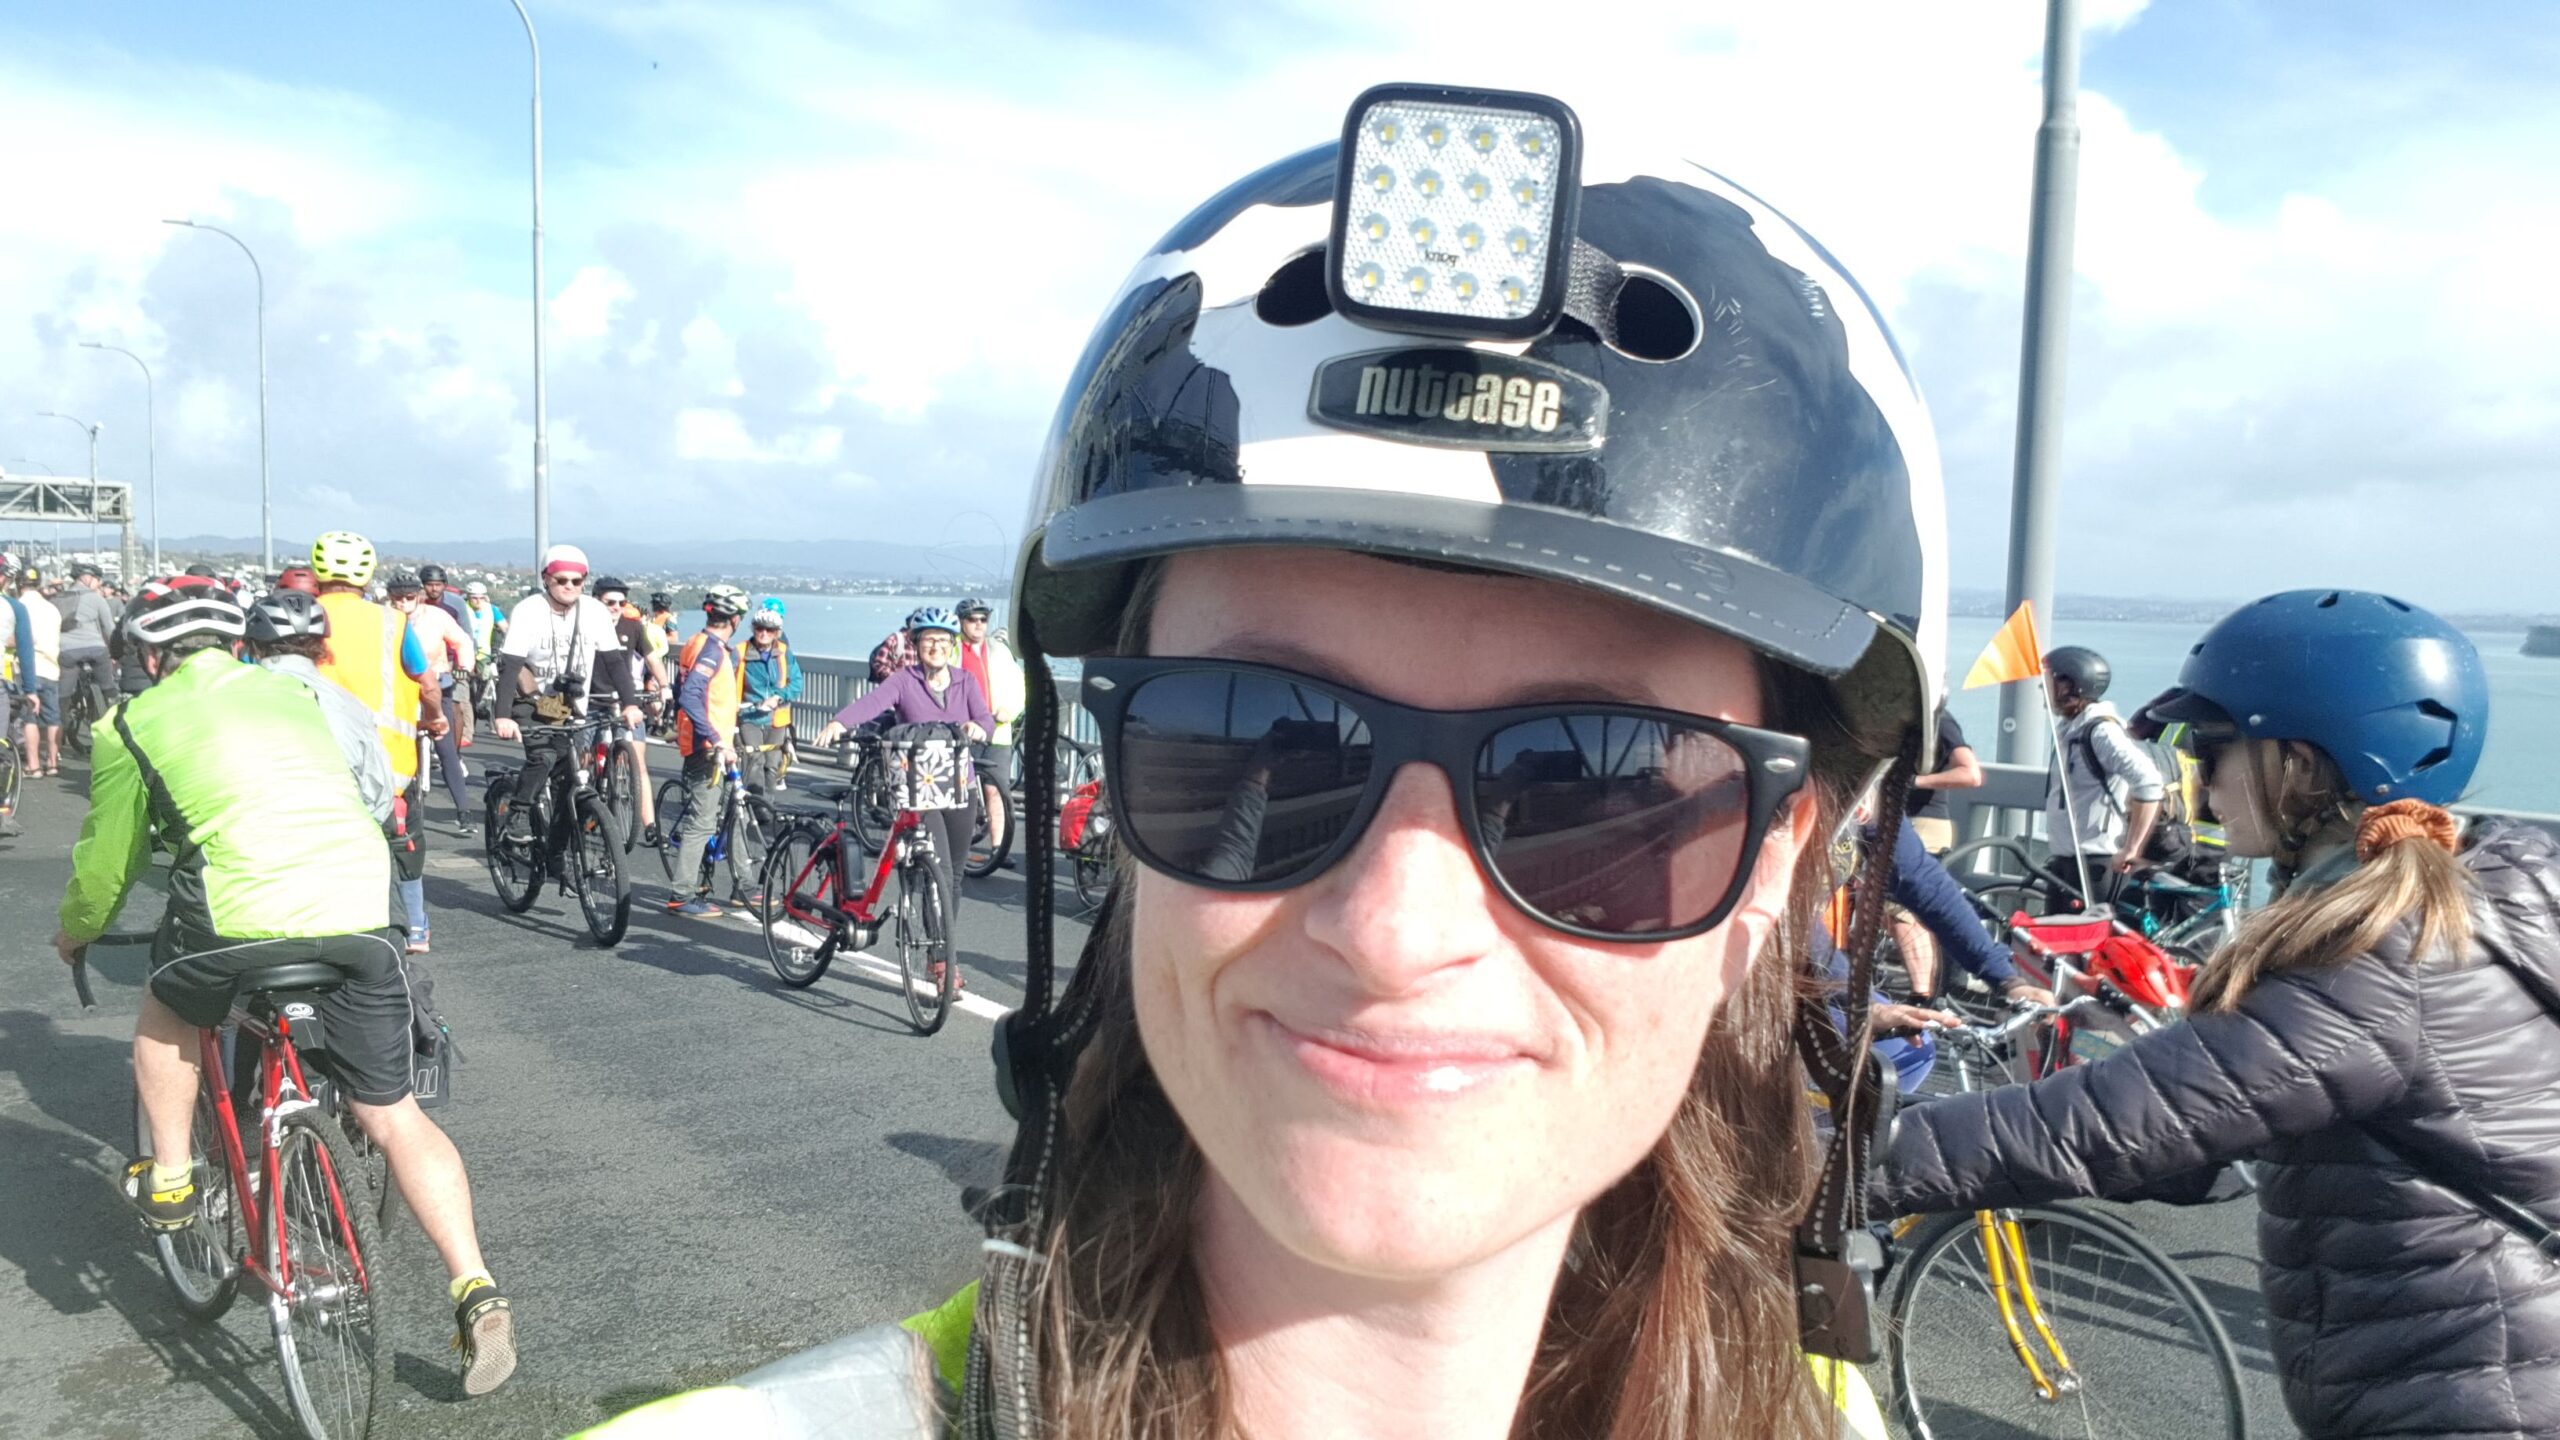 Megan taking a selfie on the Harbour Bridge with her helmet on. In the background the bridge is crowded with people riding bikes as part of a demonstration